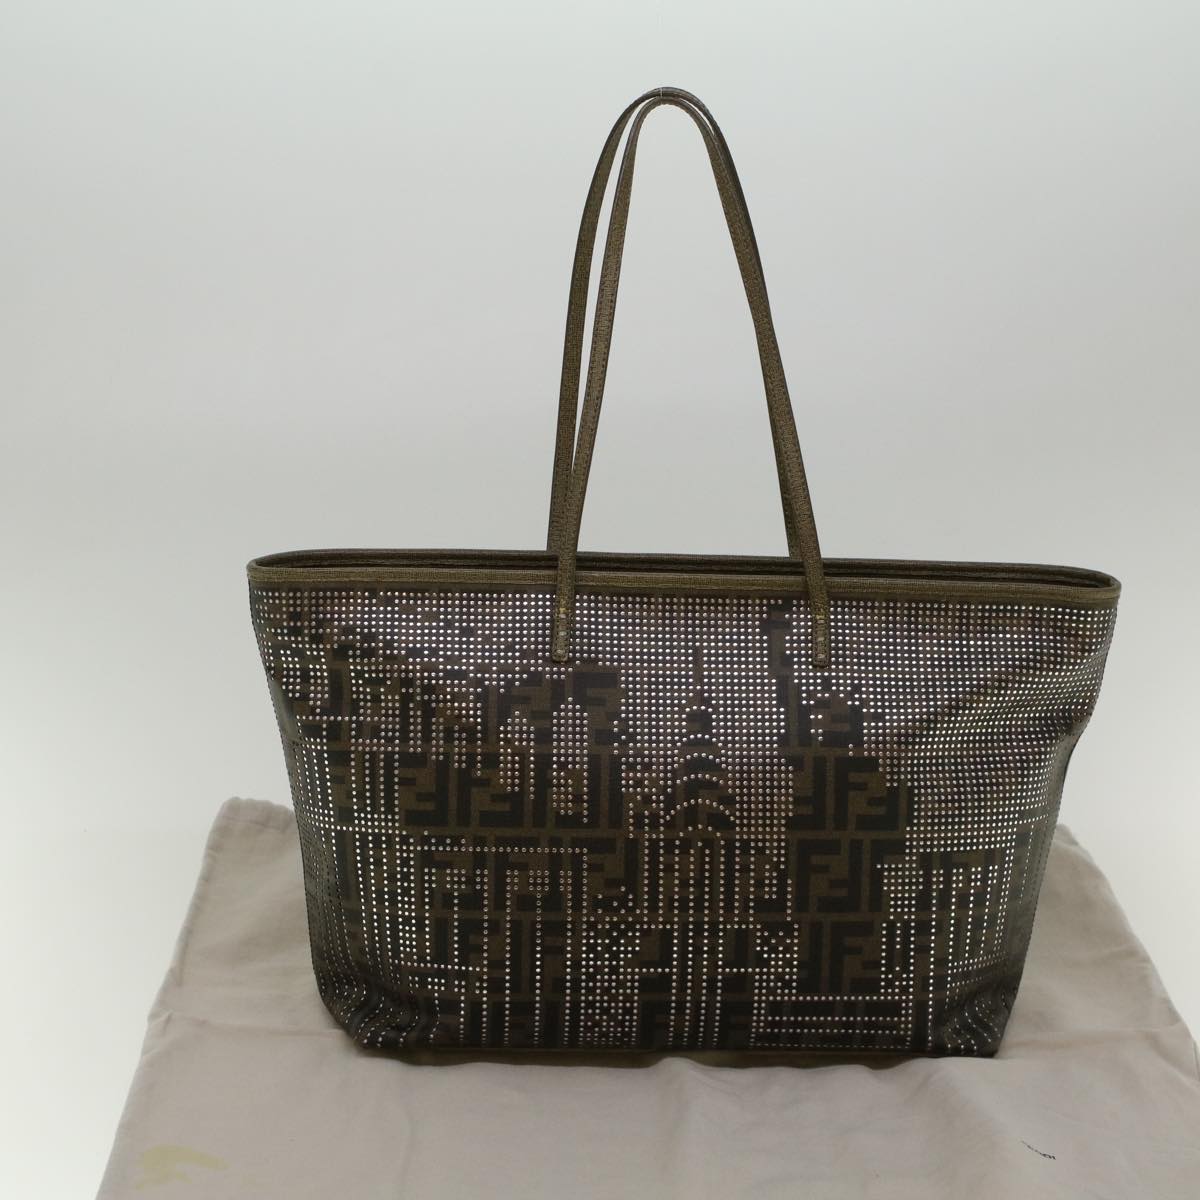 FENDI Zucca Canvas New York Tote Bag PVC Leather Brown Silver Auth 58639